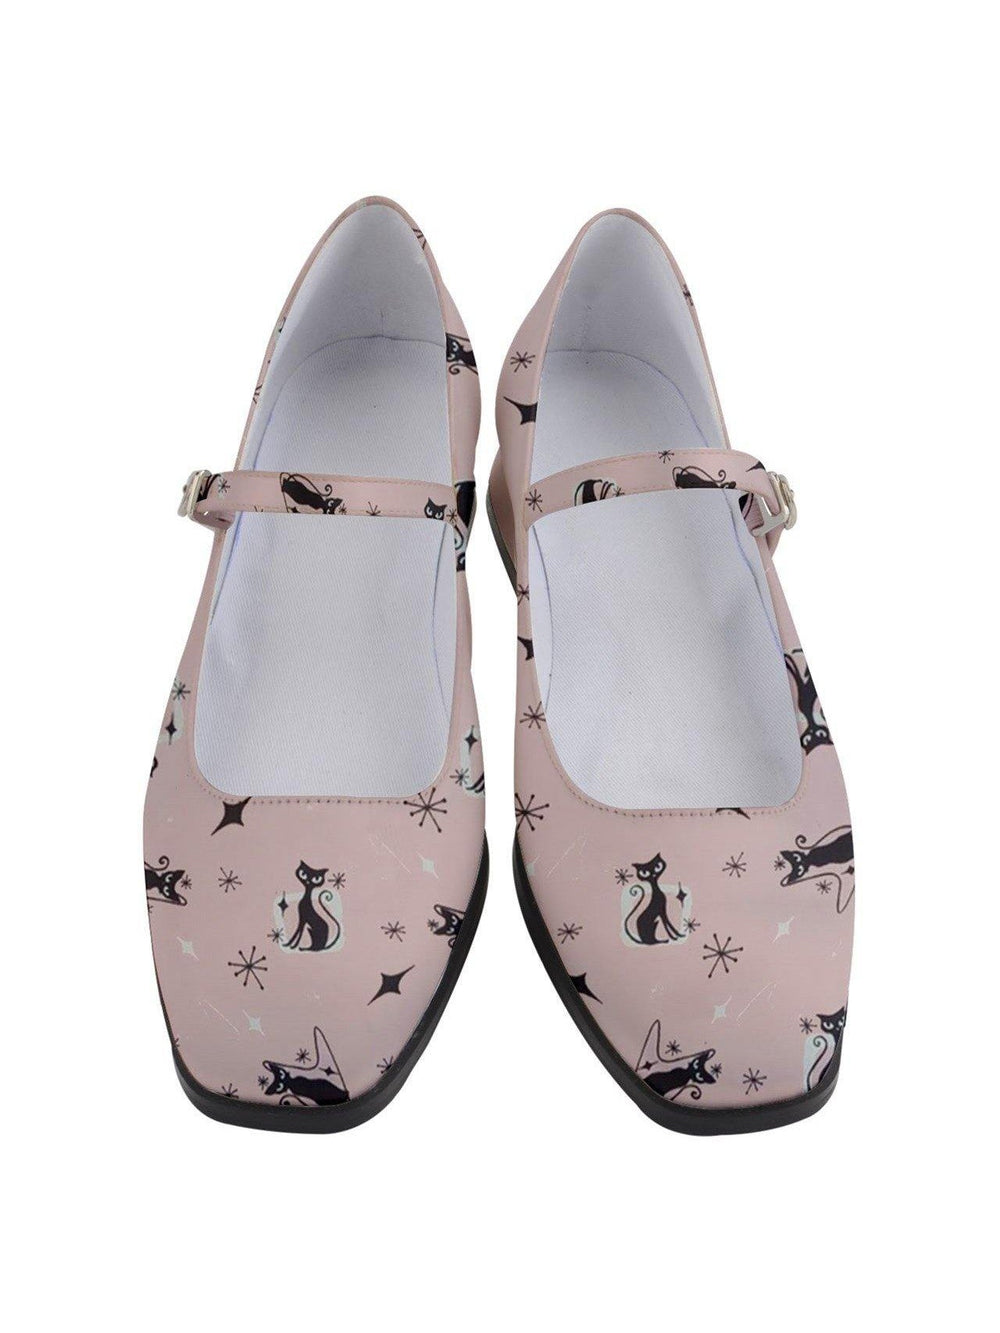 What's New Pussycat Women's Mary Jane Shoes [IN STOCK]